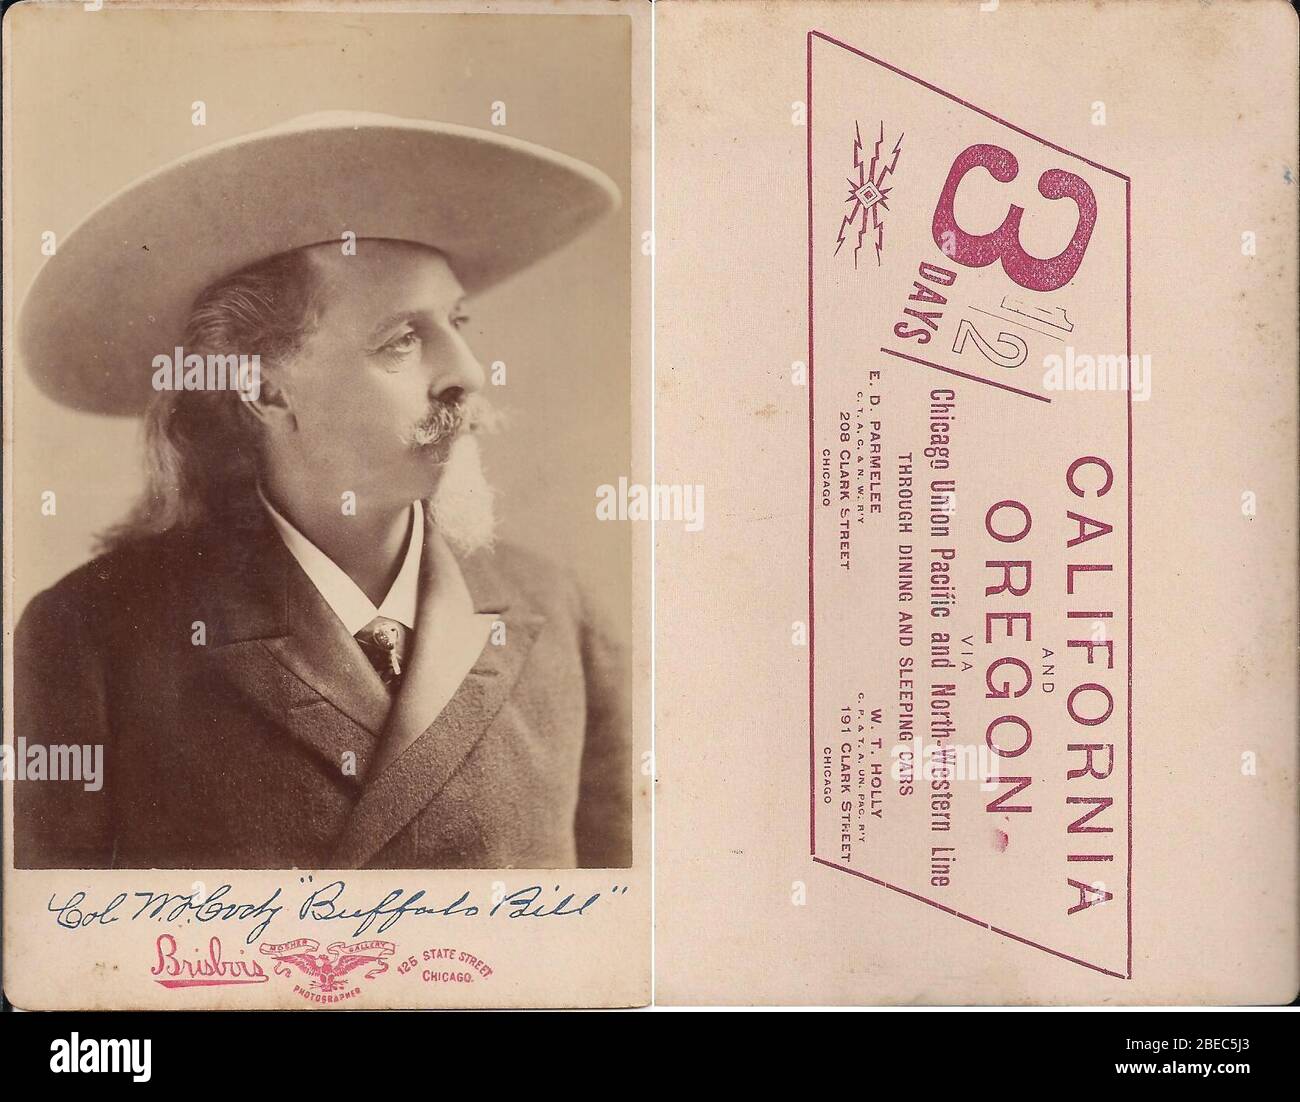 'Photo of Buffalo Bill Cody promoting the Overland Limited.  This appears to be a cabinet card and also appears to be an original signature of Cody.  The back of the card promotes the Overland Limited, though the train's name is not mentioned.  It is not known how Cody became associated with the two railroads jointly operating the train.; Not dated. Circa 1899 (Union Pacific and Chicago and North Western become partners in the train route) to 1917 (death of Cody).; eBay item photo front  photo back; Photographer-Brisbois, Chicago.; ' Stock Photo